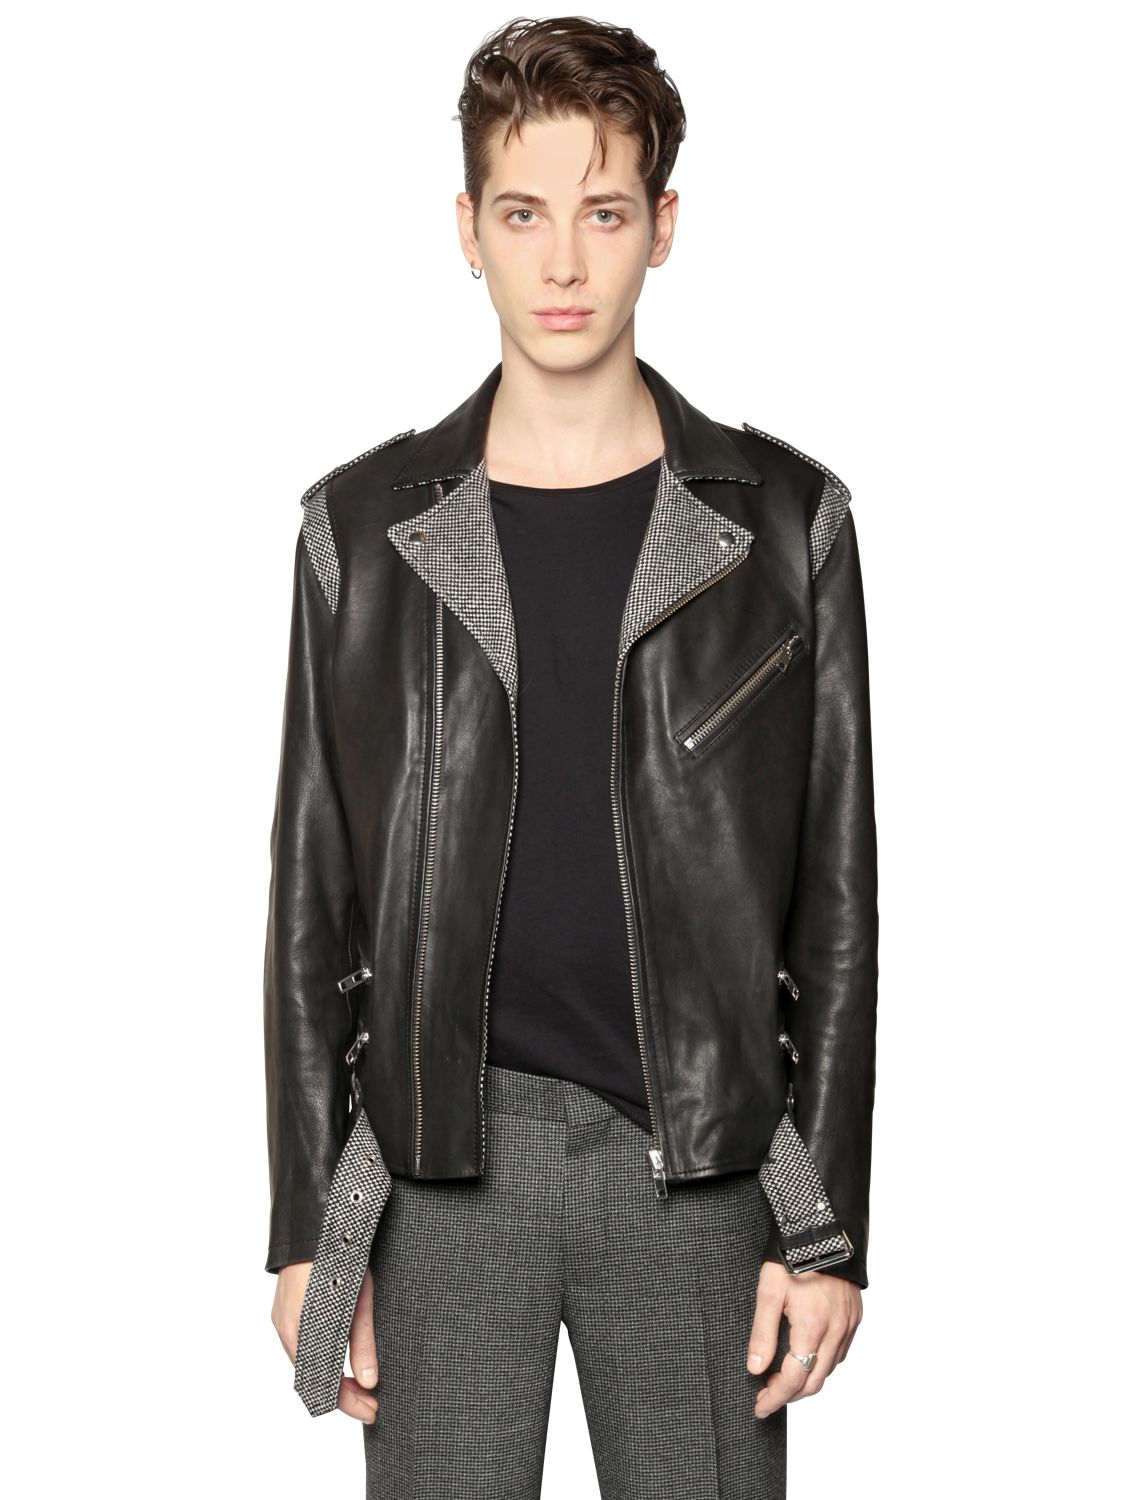 Lyst - The Kooples Checkered Wool & Leather Moto Jacket in Black for Men